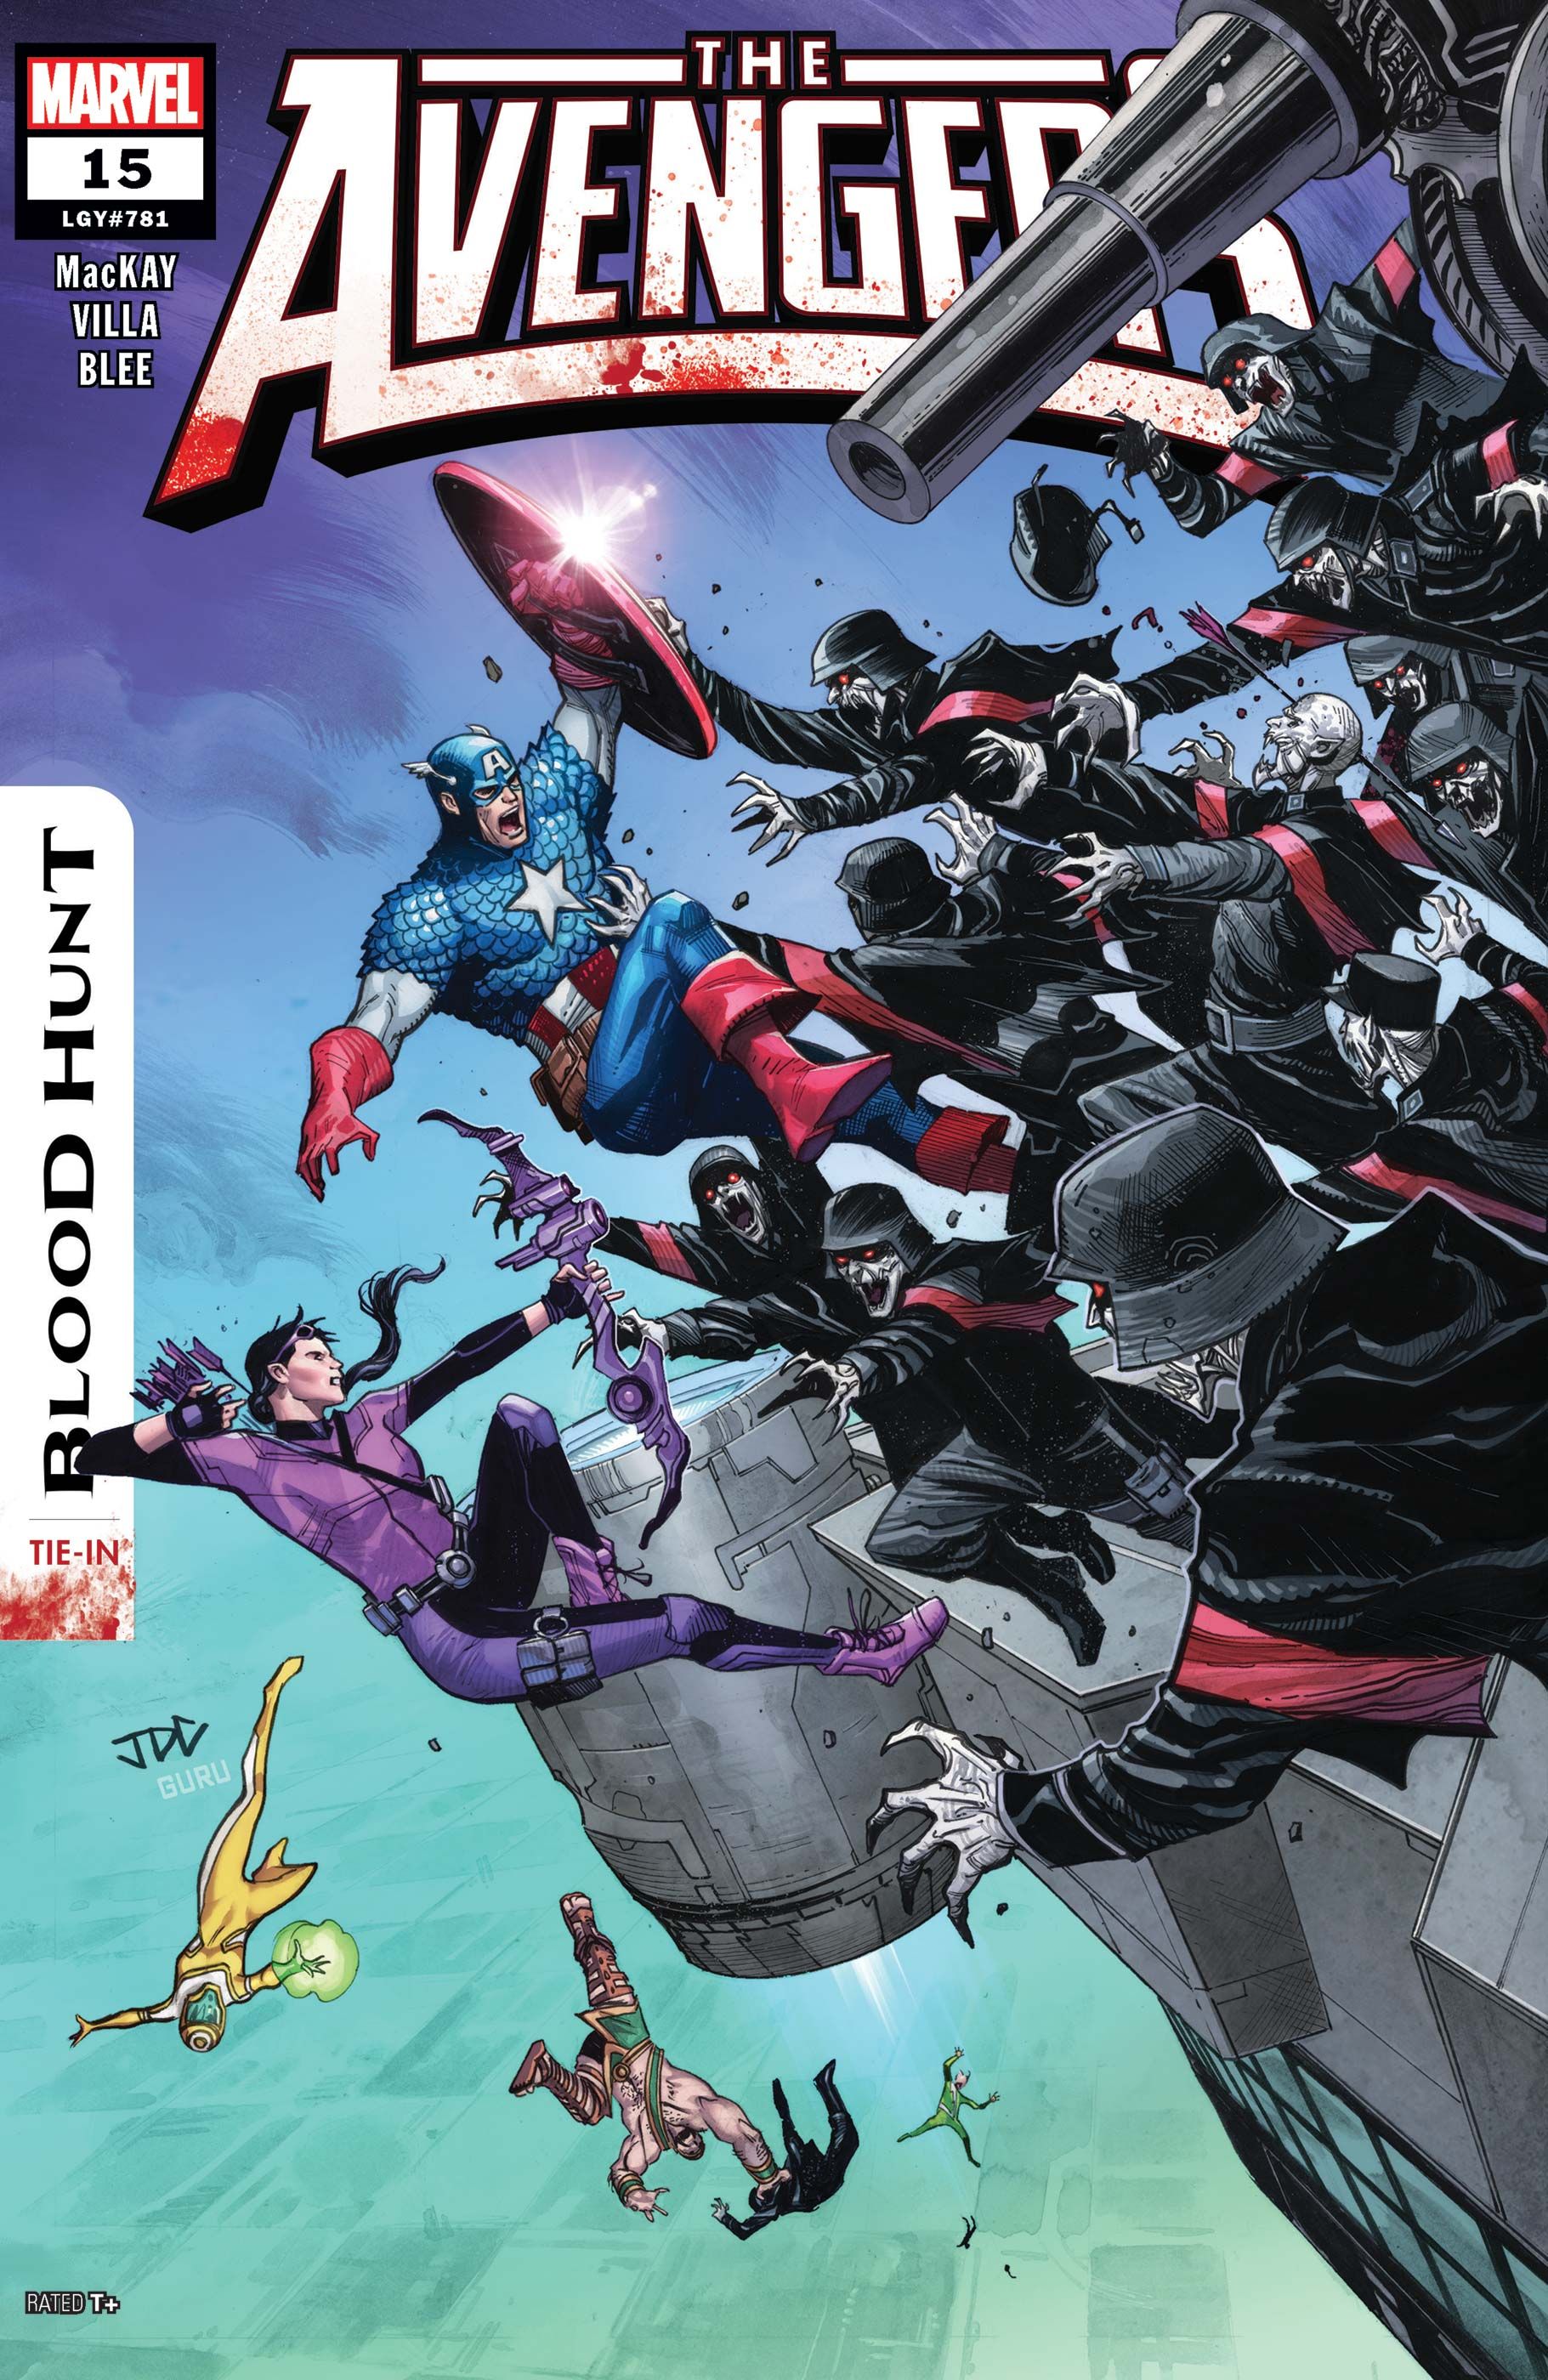 Avengers #15 cover, Captain America and other heroes falling off a cliff, chased by vampires.